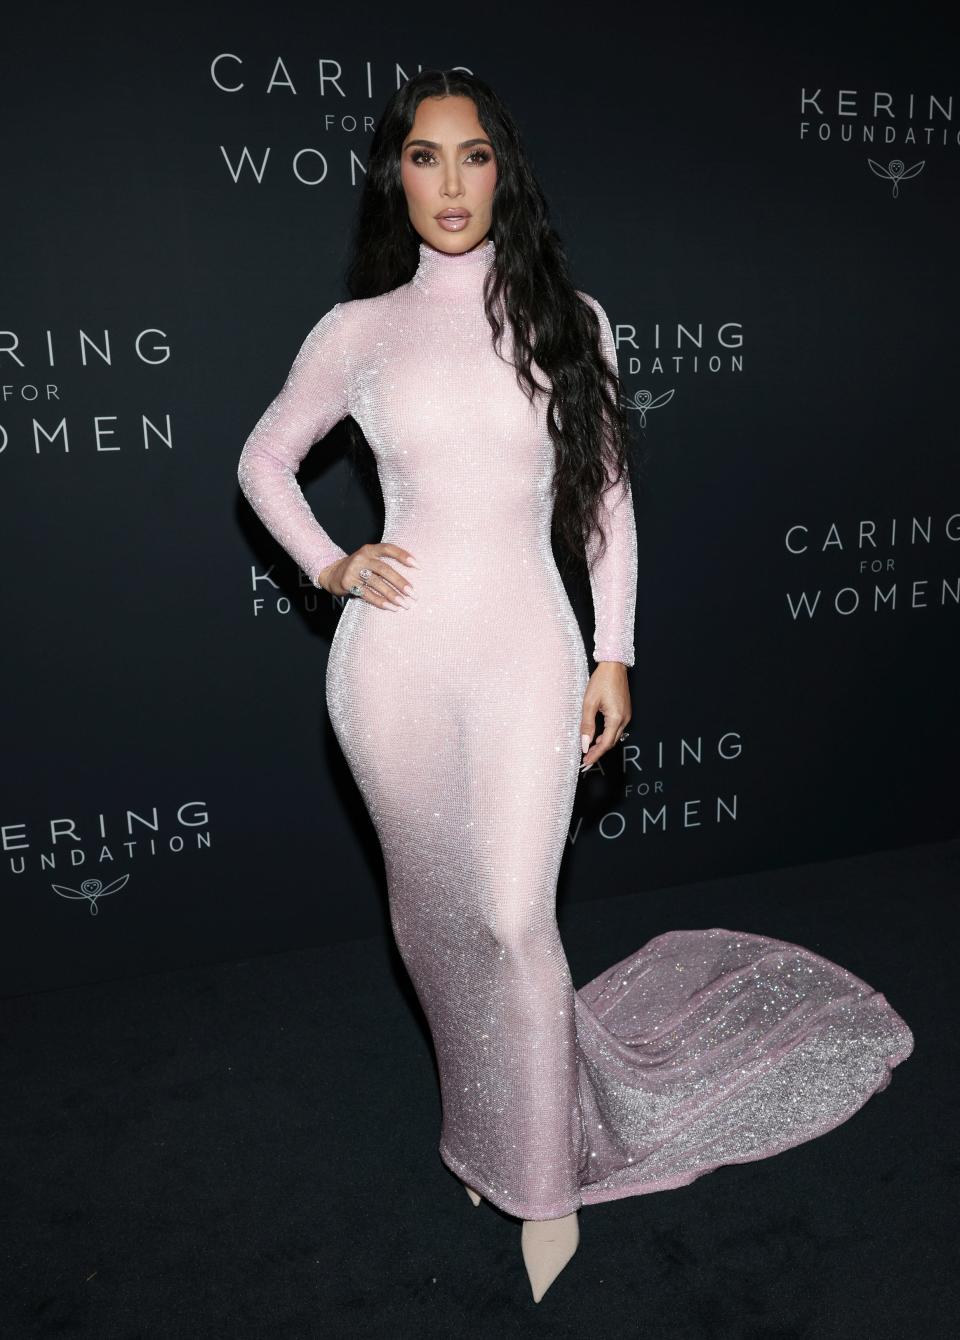 Kim Kardashian attends the 2nd annual Kering Foundation's Caring for Women Gala on Tuesday Sept. 12, 2023, in New York.